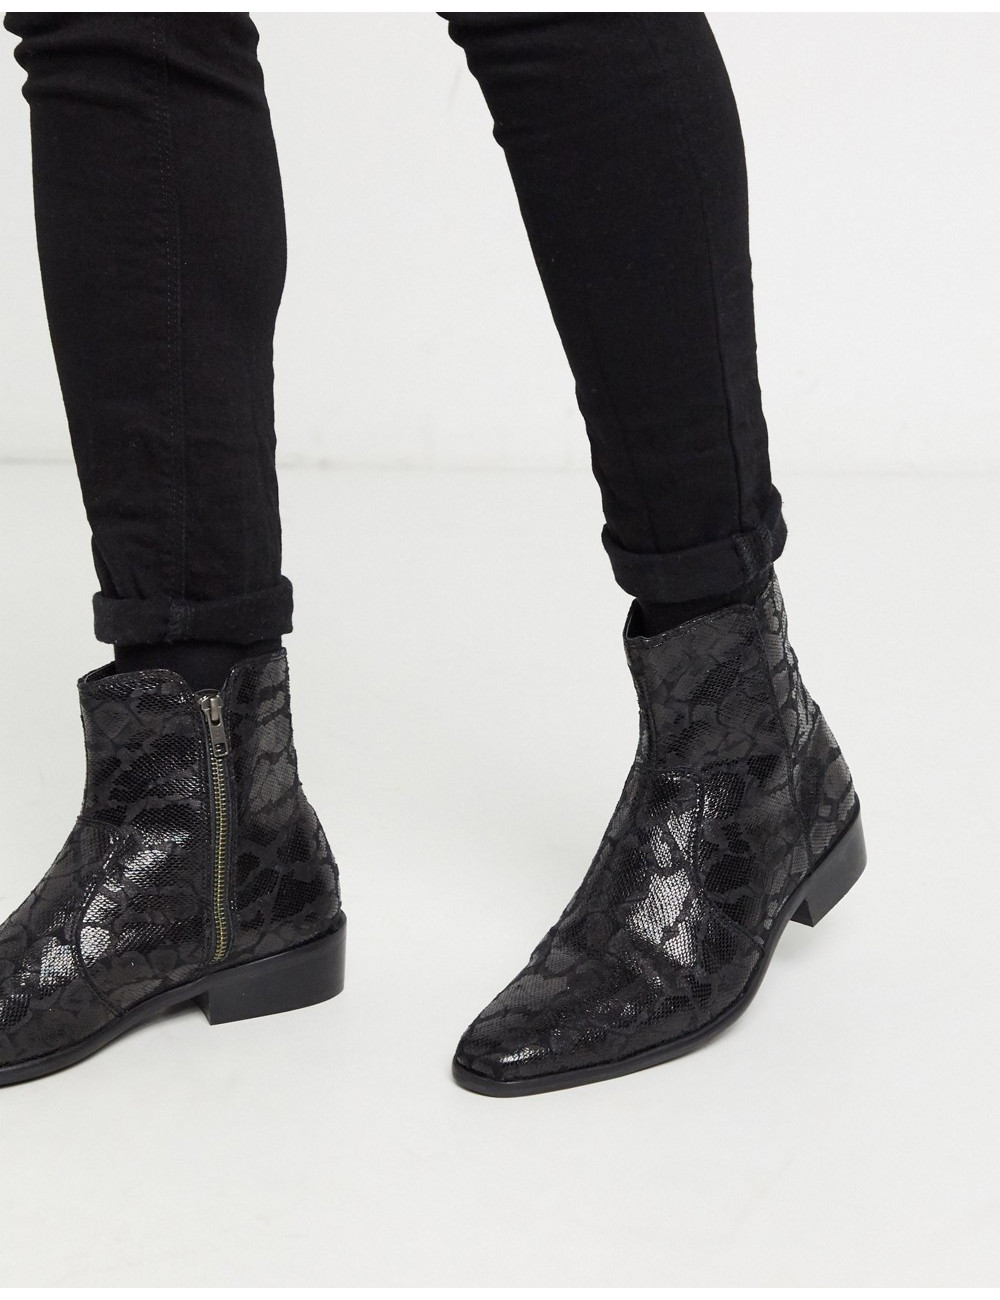 Topman faux leather boot...